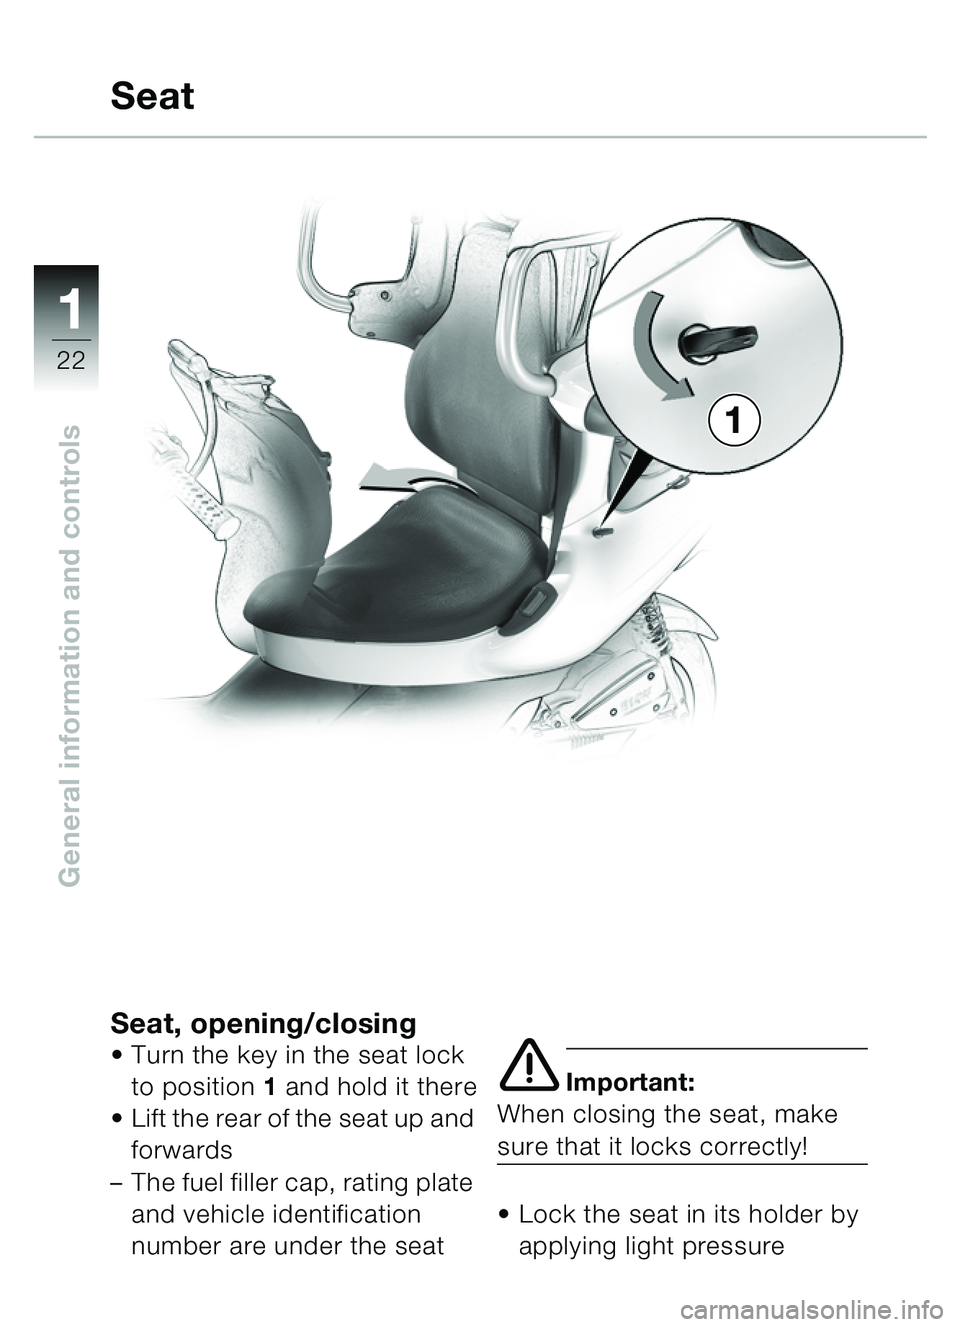 BMW MOTORRAD C1 2000  Riders Manual (in English) 11
22
General information and controls
Seat, opening/closingTurn the key in the seat lock 
to position 1  and hold it there
 Lift the rear of the seat up and 
forwards
– The fuel filler cap, ratin